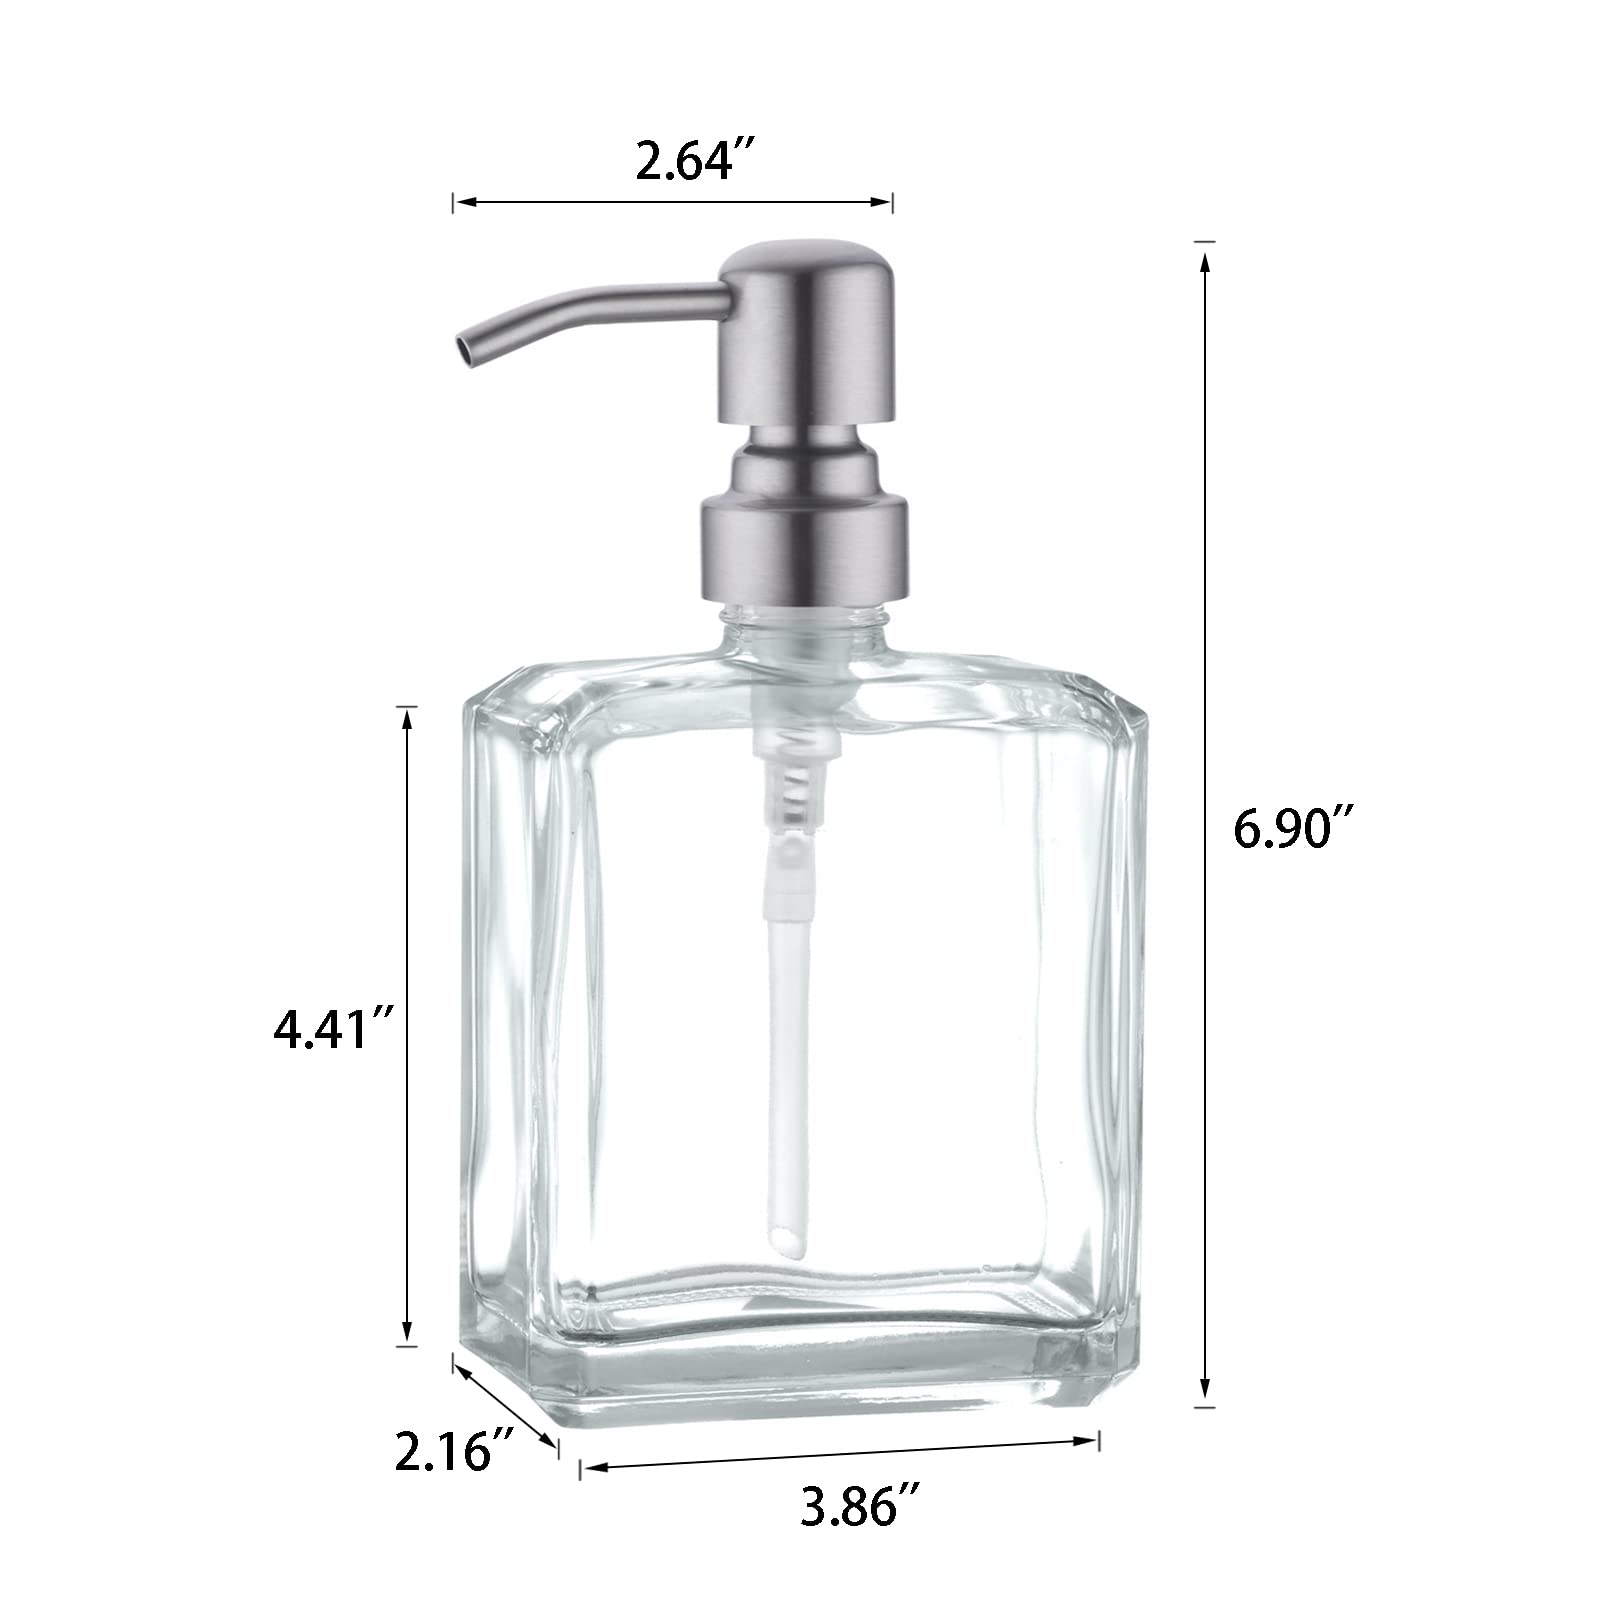 Kmeino Square Clear Glass Dish Soap Dispenser, Antique Design Refillable Hand Soap Dispenser with Rust Proof Stainless Steel Pump, 13.5 oz Lotion Dispenser for Bathroom Vanity, Kitchen Countertop